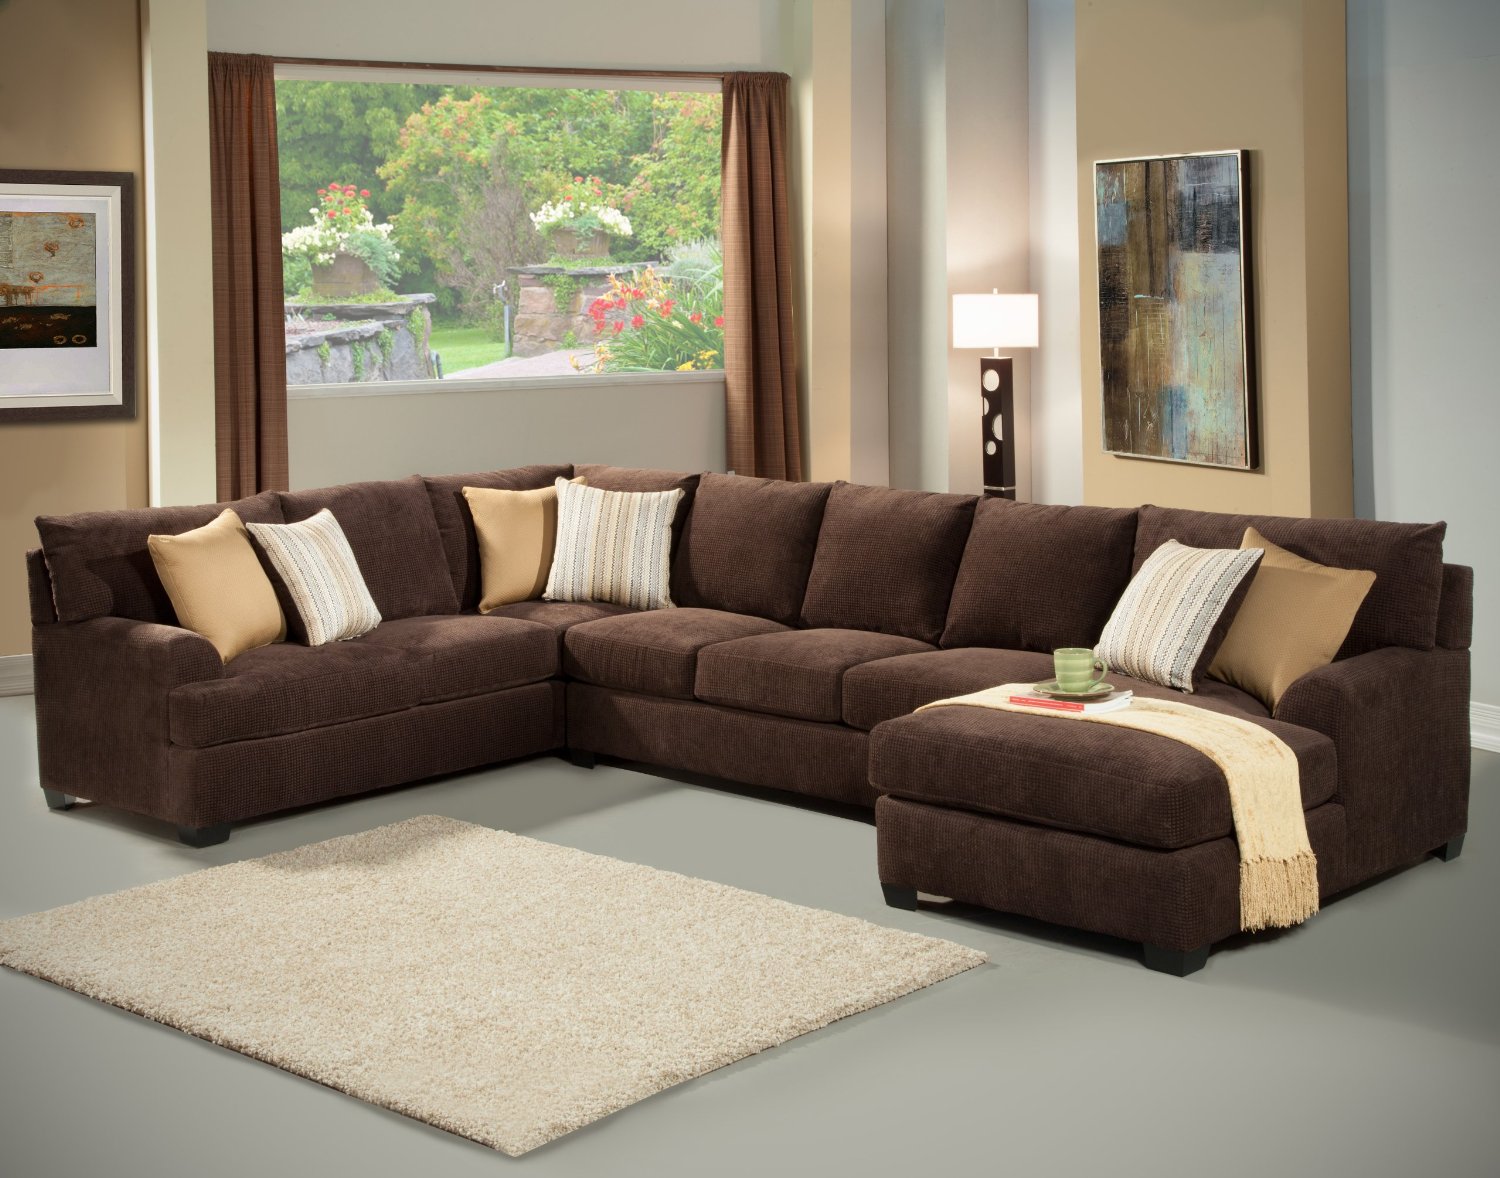 brown sectional sofa beautiful brown sectional sofas 20 in contemporary sofa inspiration with brown  sectional ELRODOD